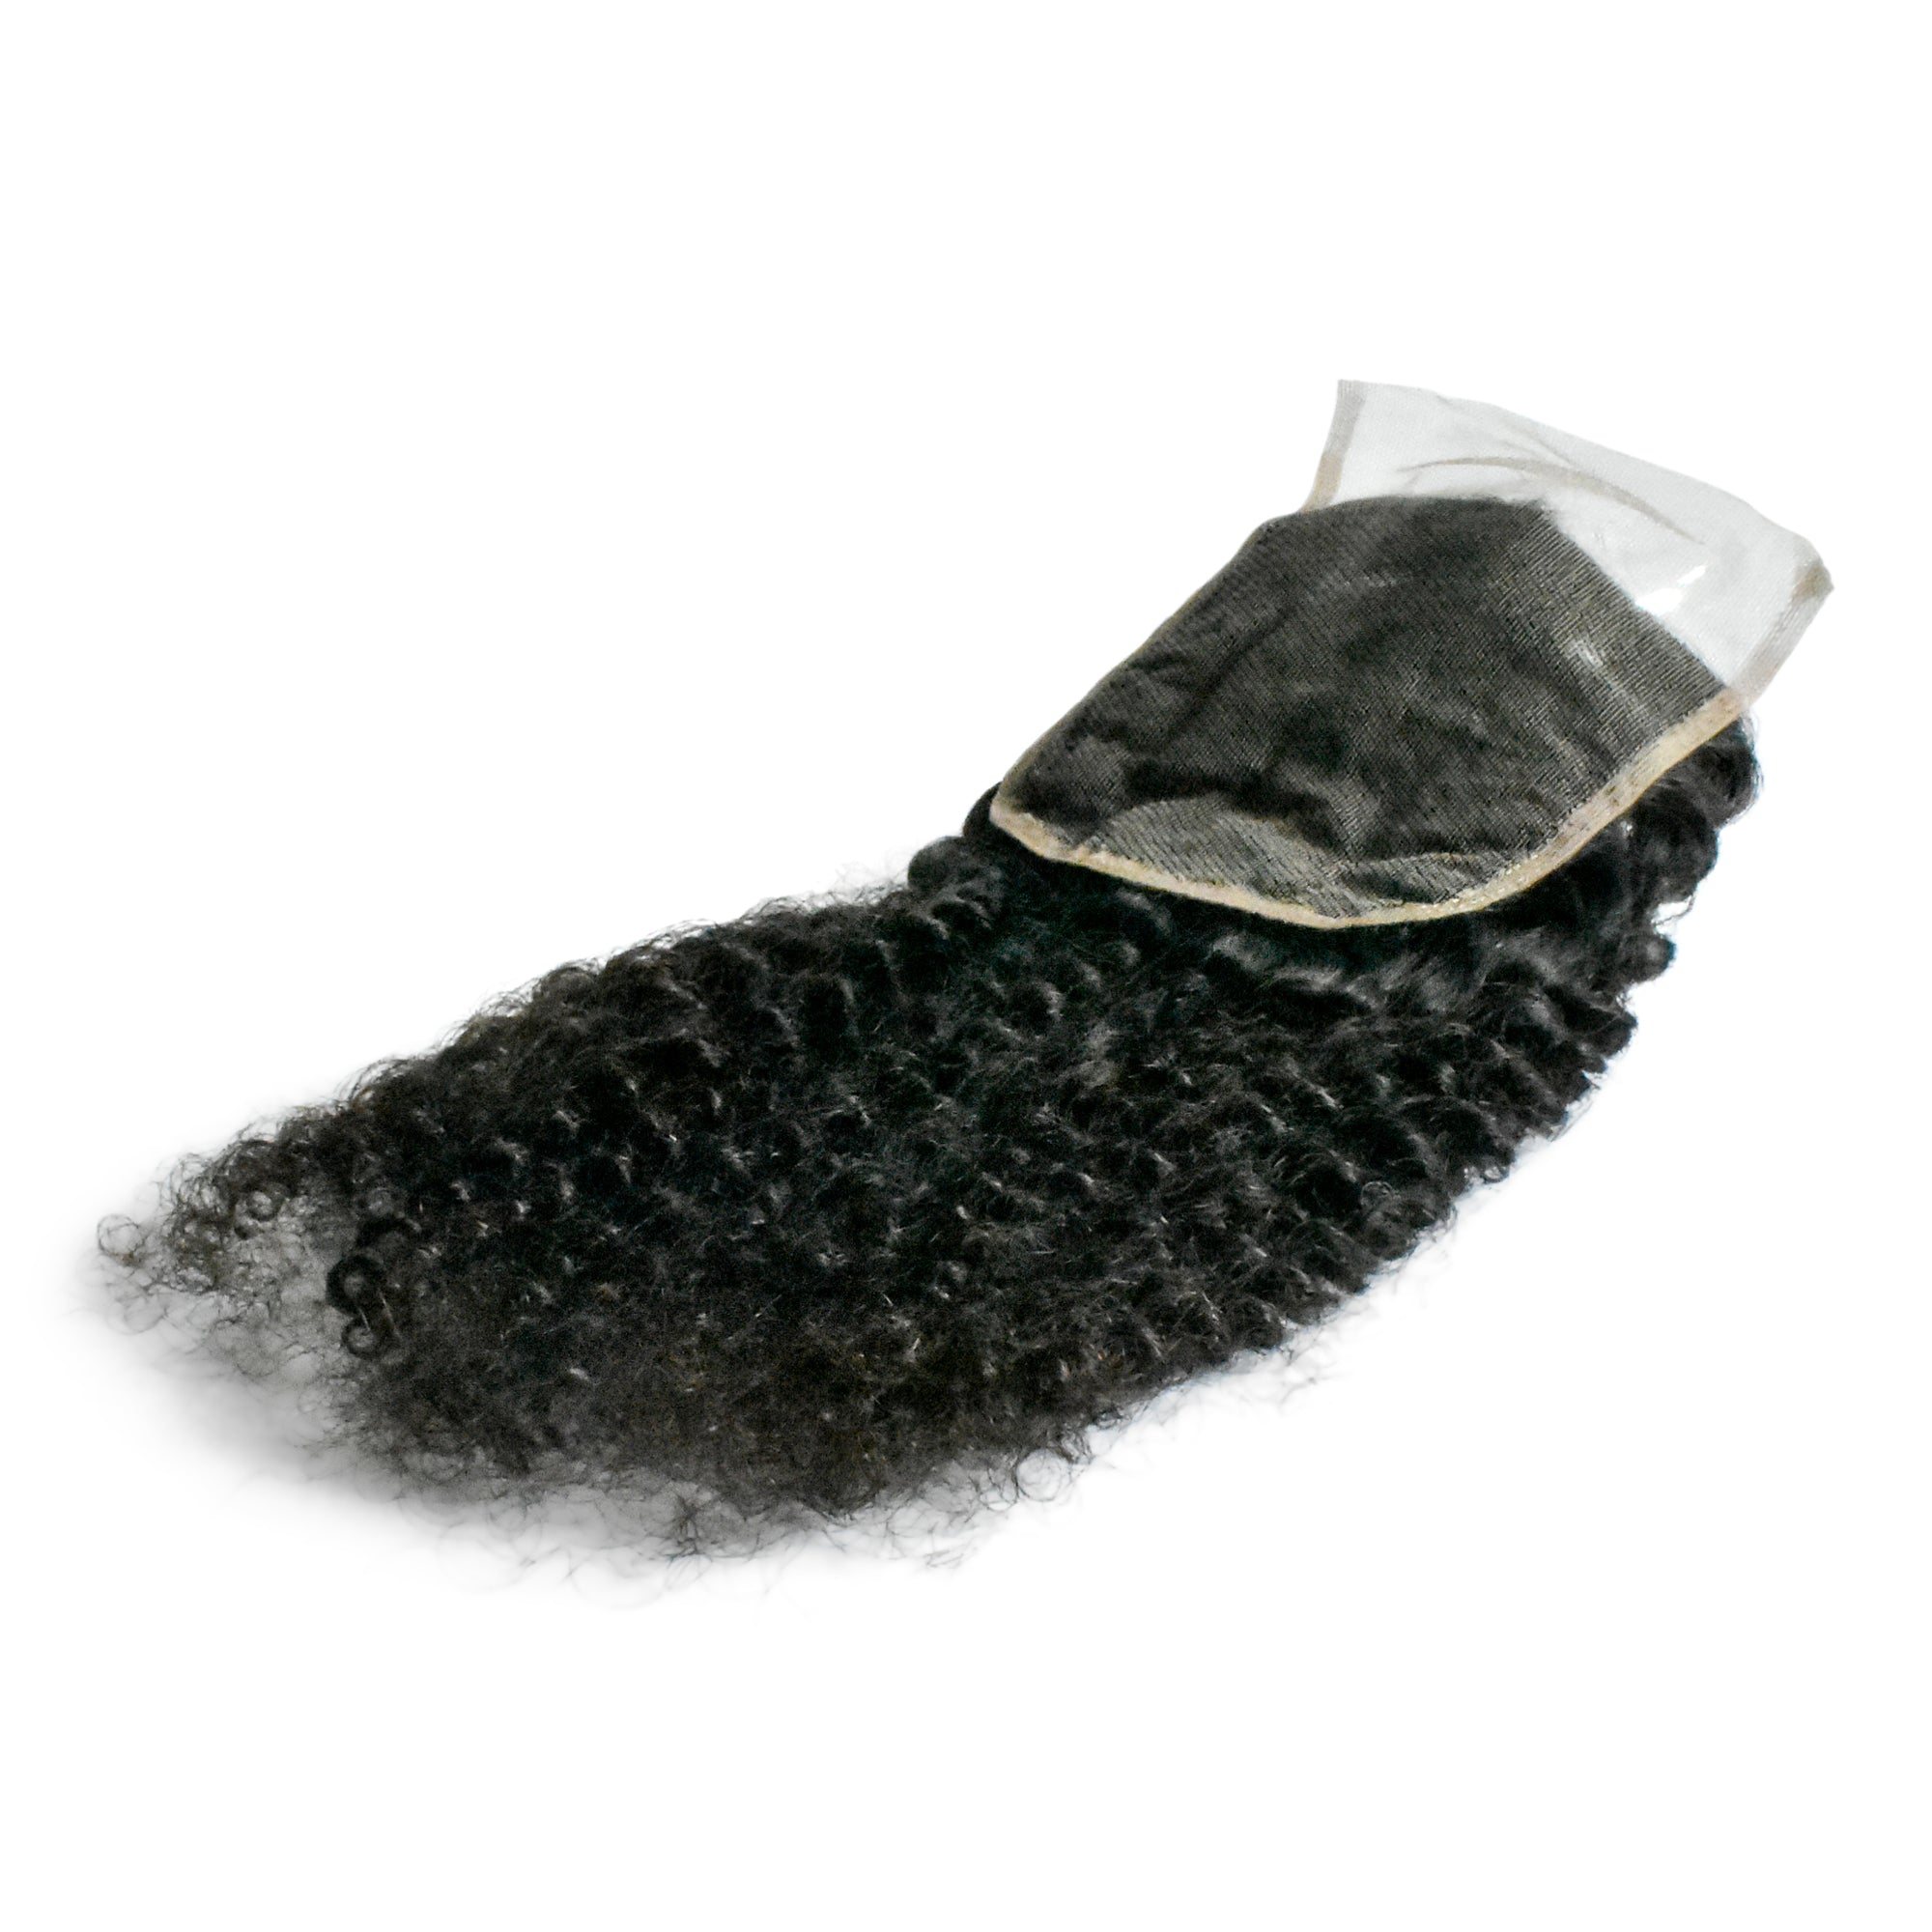 The afro curly closure gives you full coverage and looks just like your own hairline